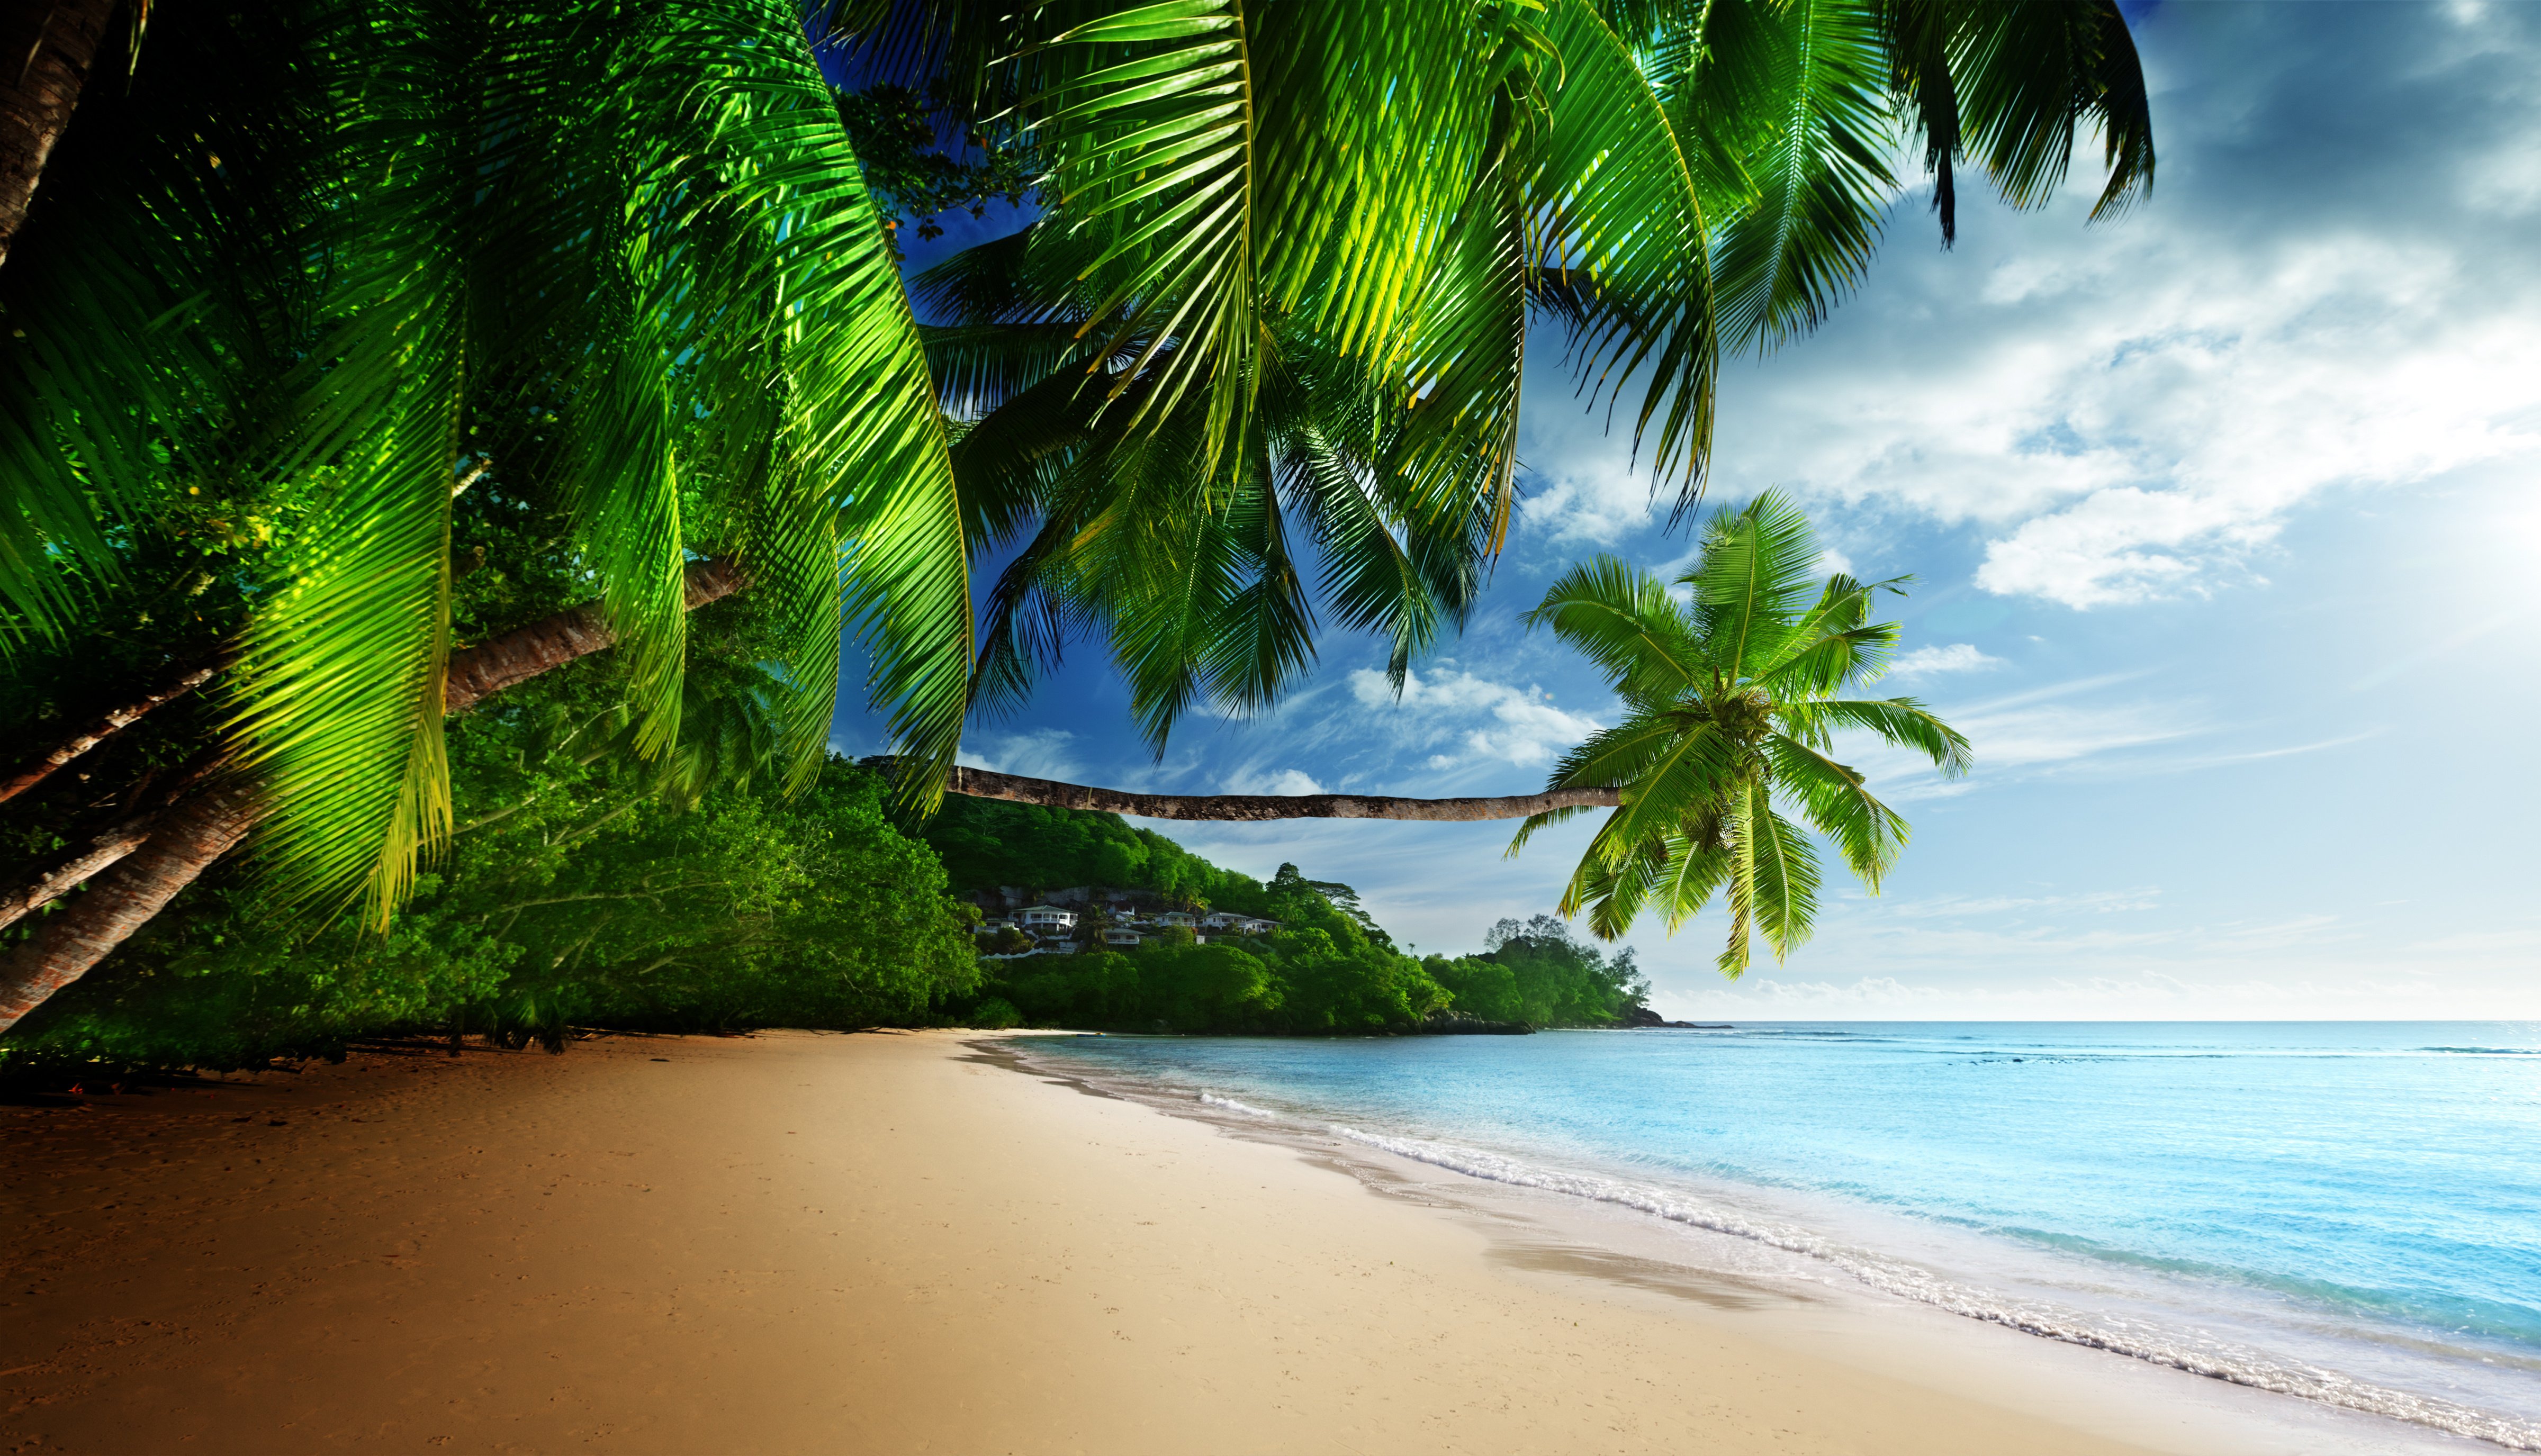 45 Beach Wallpaper For Mobile And Desktop In Full HD For 4800x2751